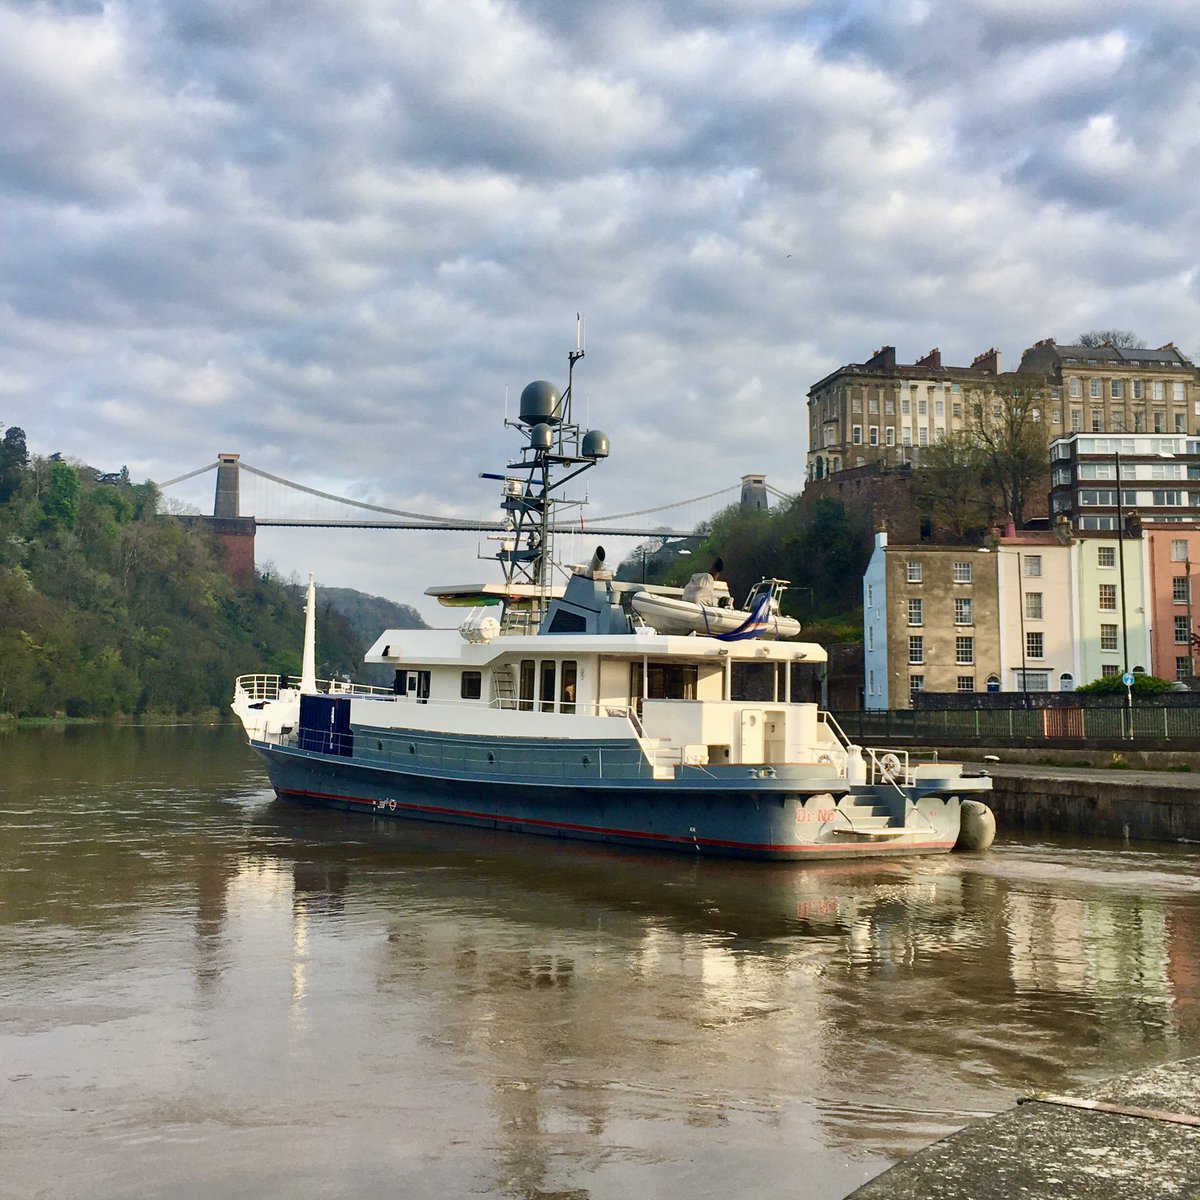 The “Dr No” leaving the Hotwells lock early this morning, and what a beautiful morning for it.☀️⚓️ @brunelsbridge @bristolport @BristolHarbFest #lovebristolharbour